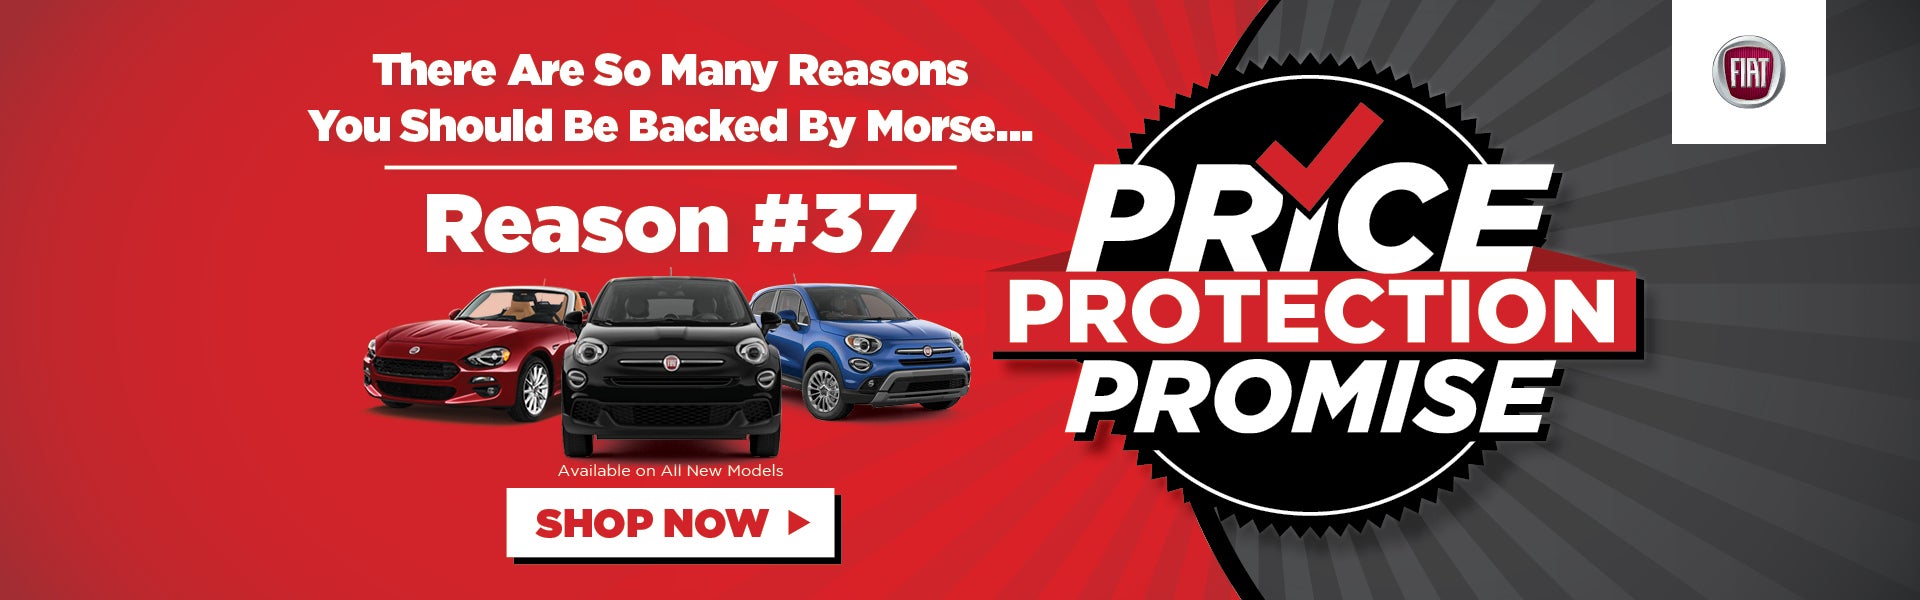 Price Protection Promise